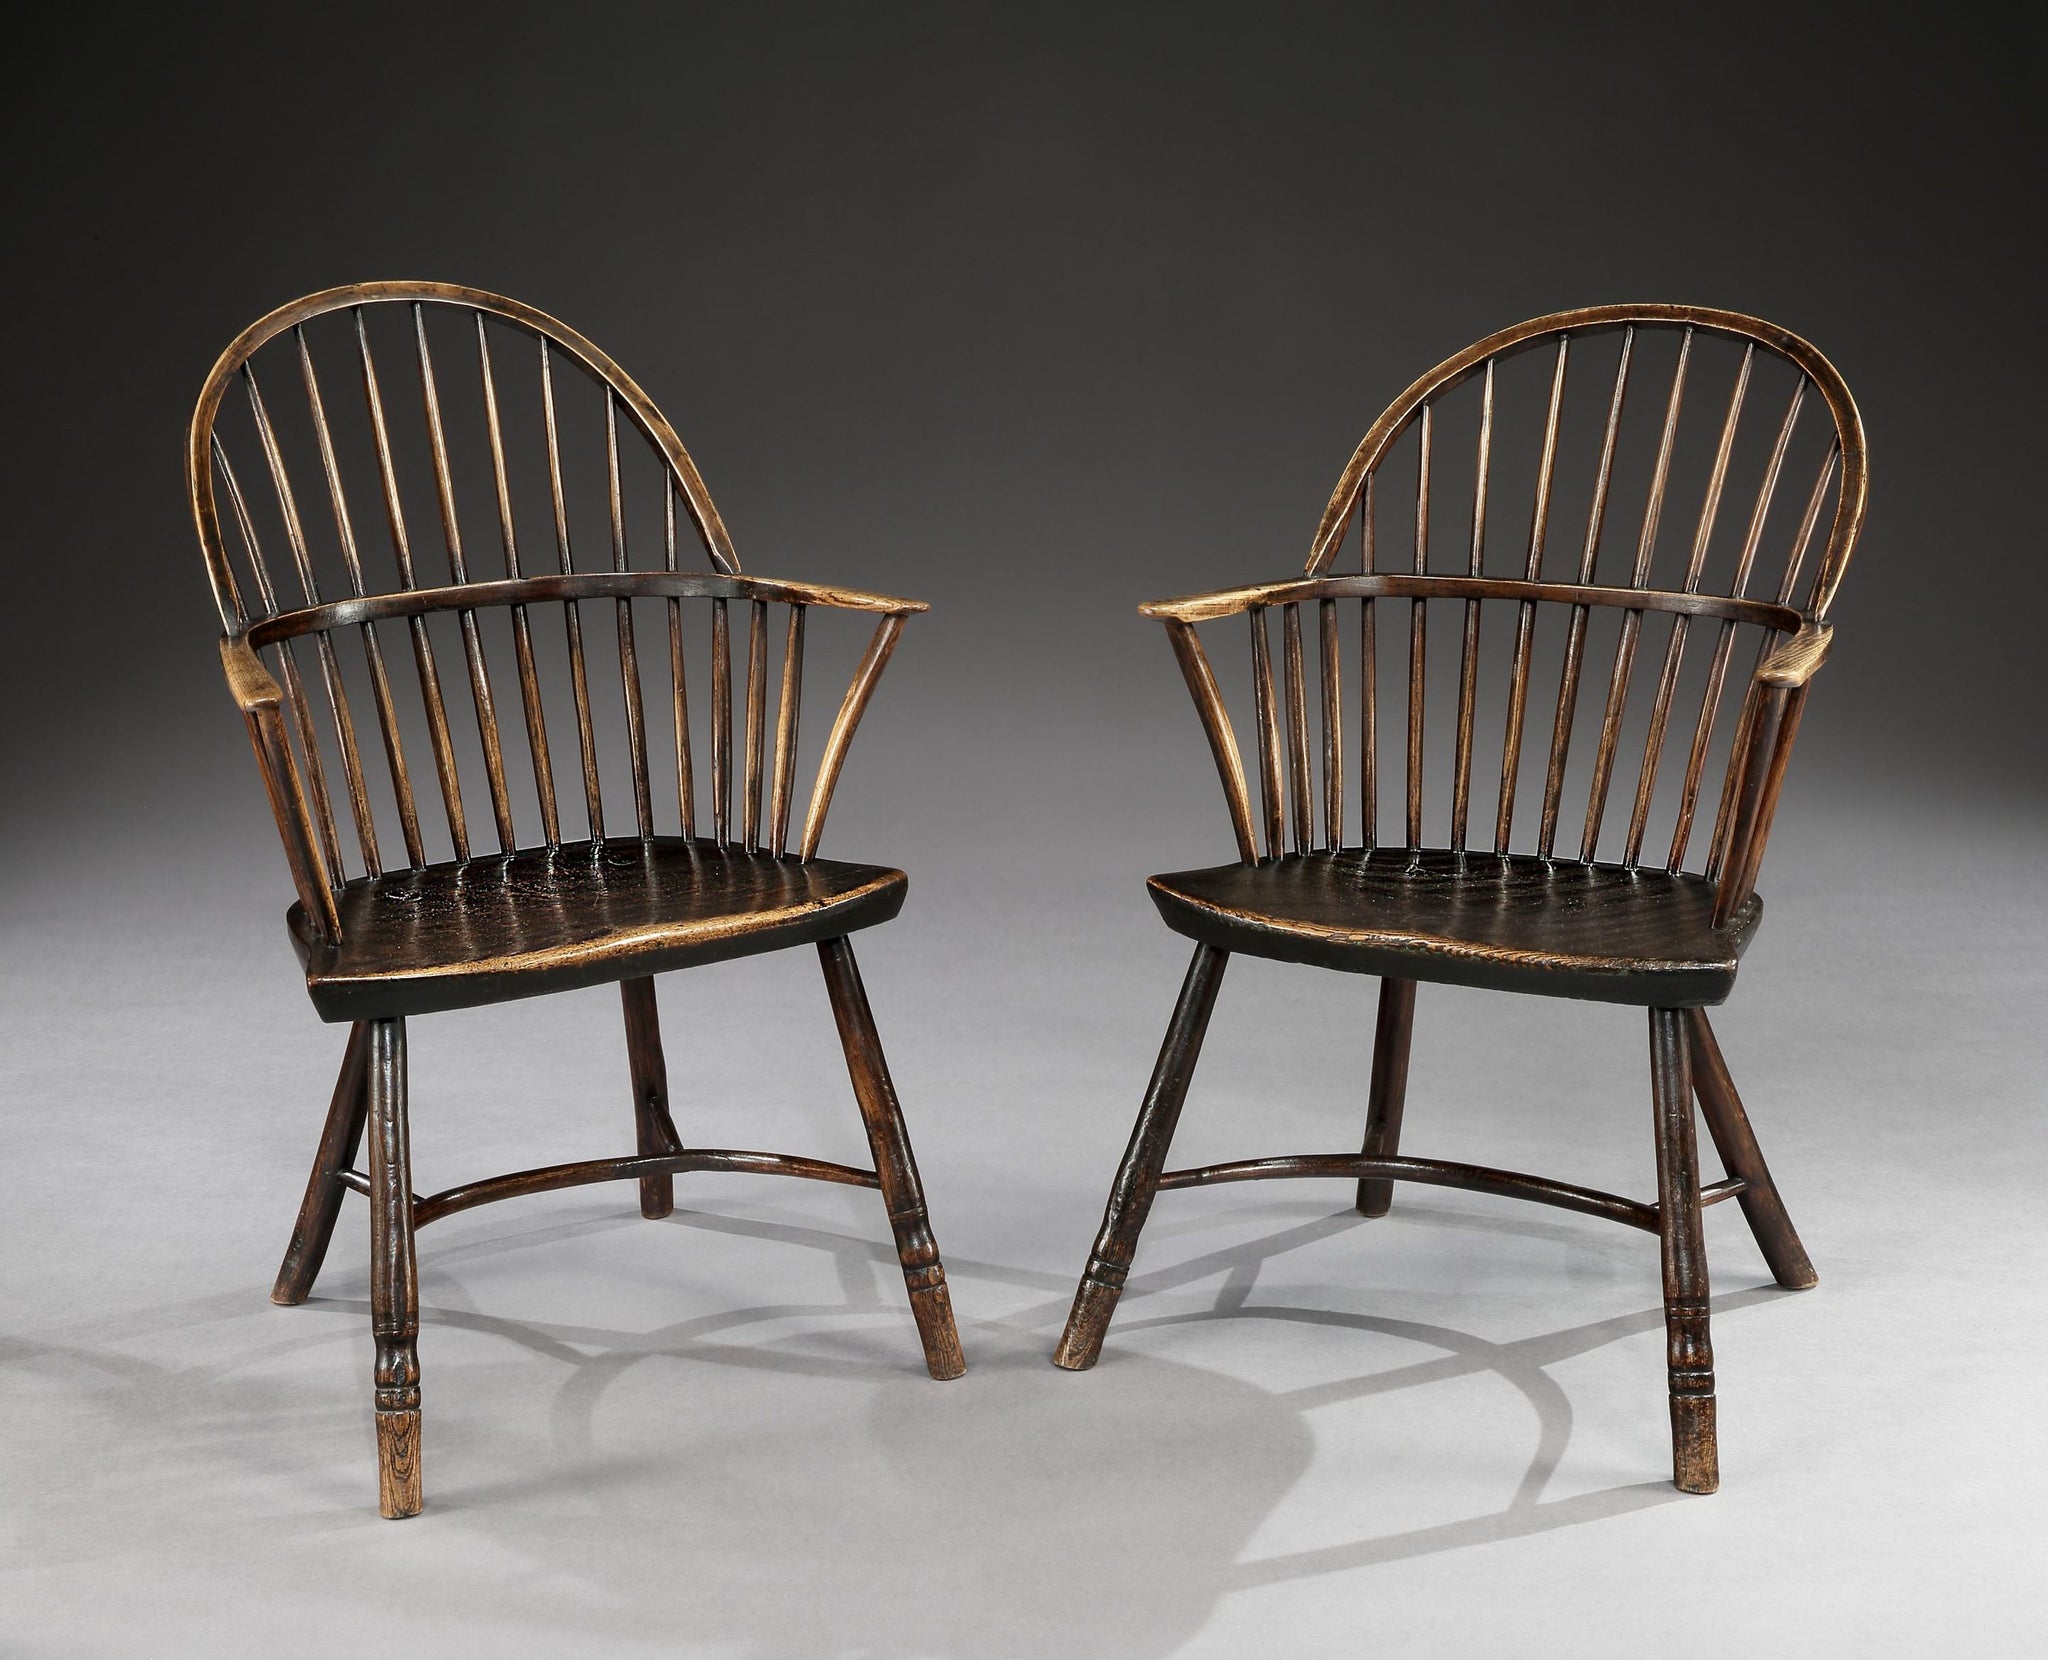 A Fine Pair of Windsor Bow-Back Armchairs